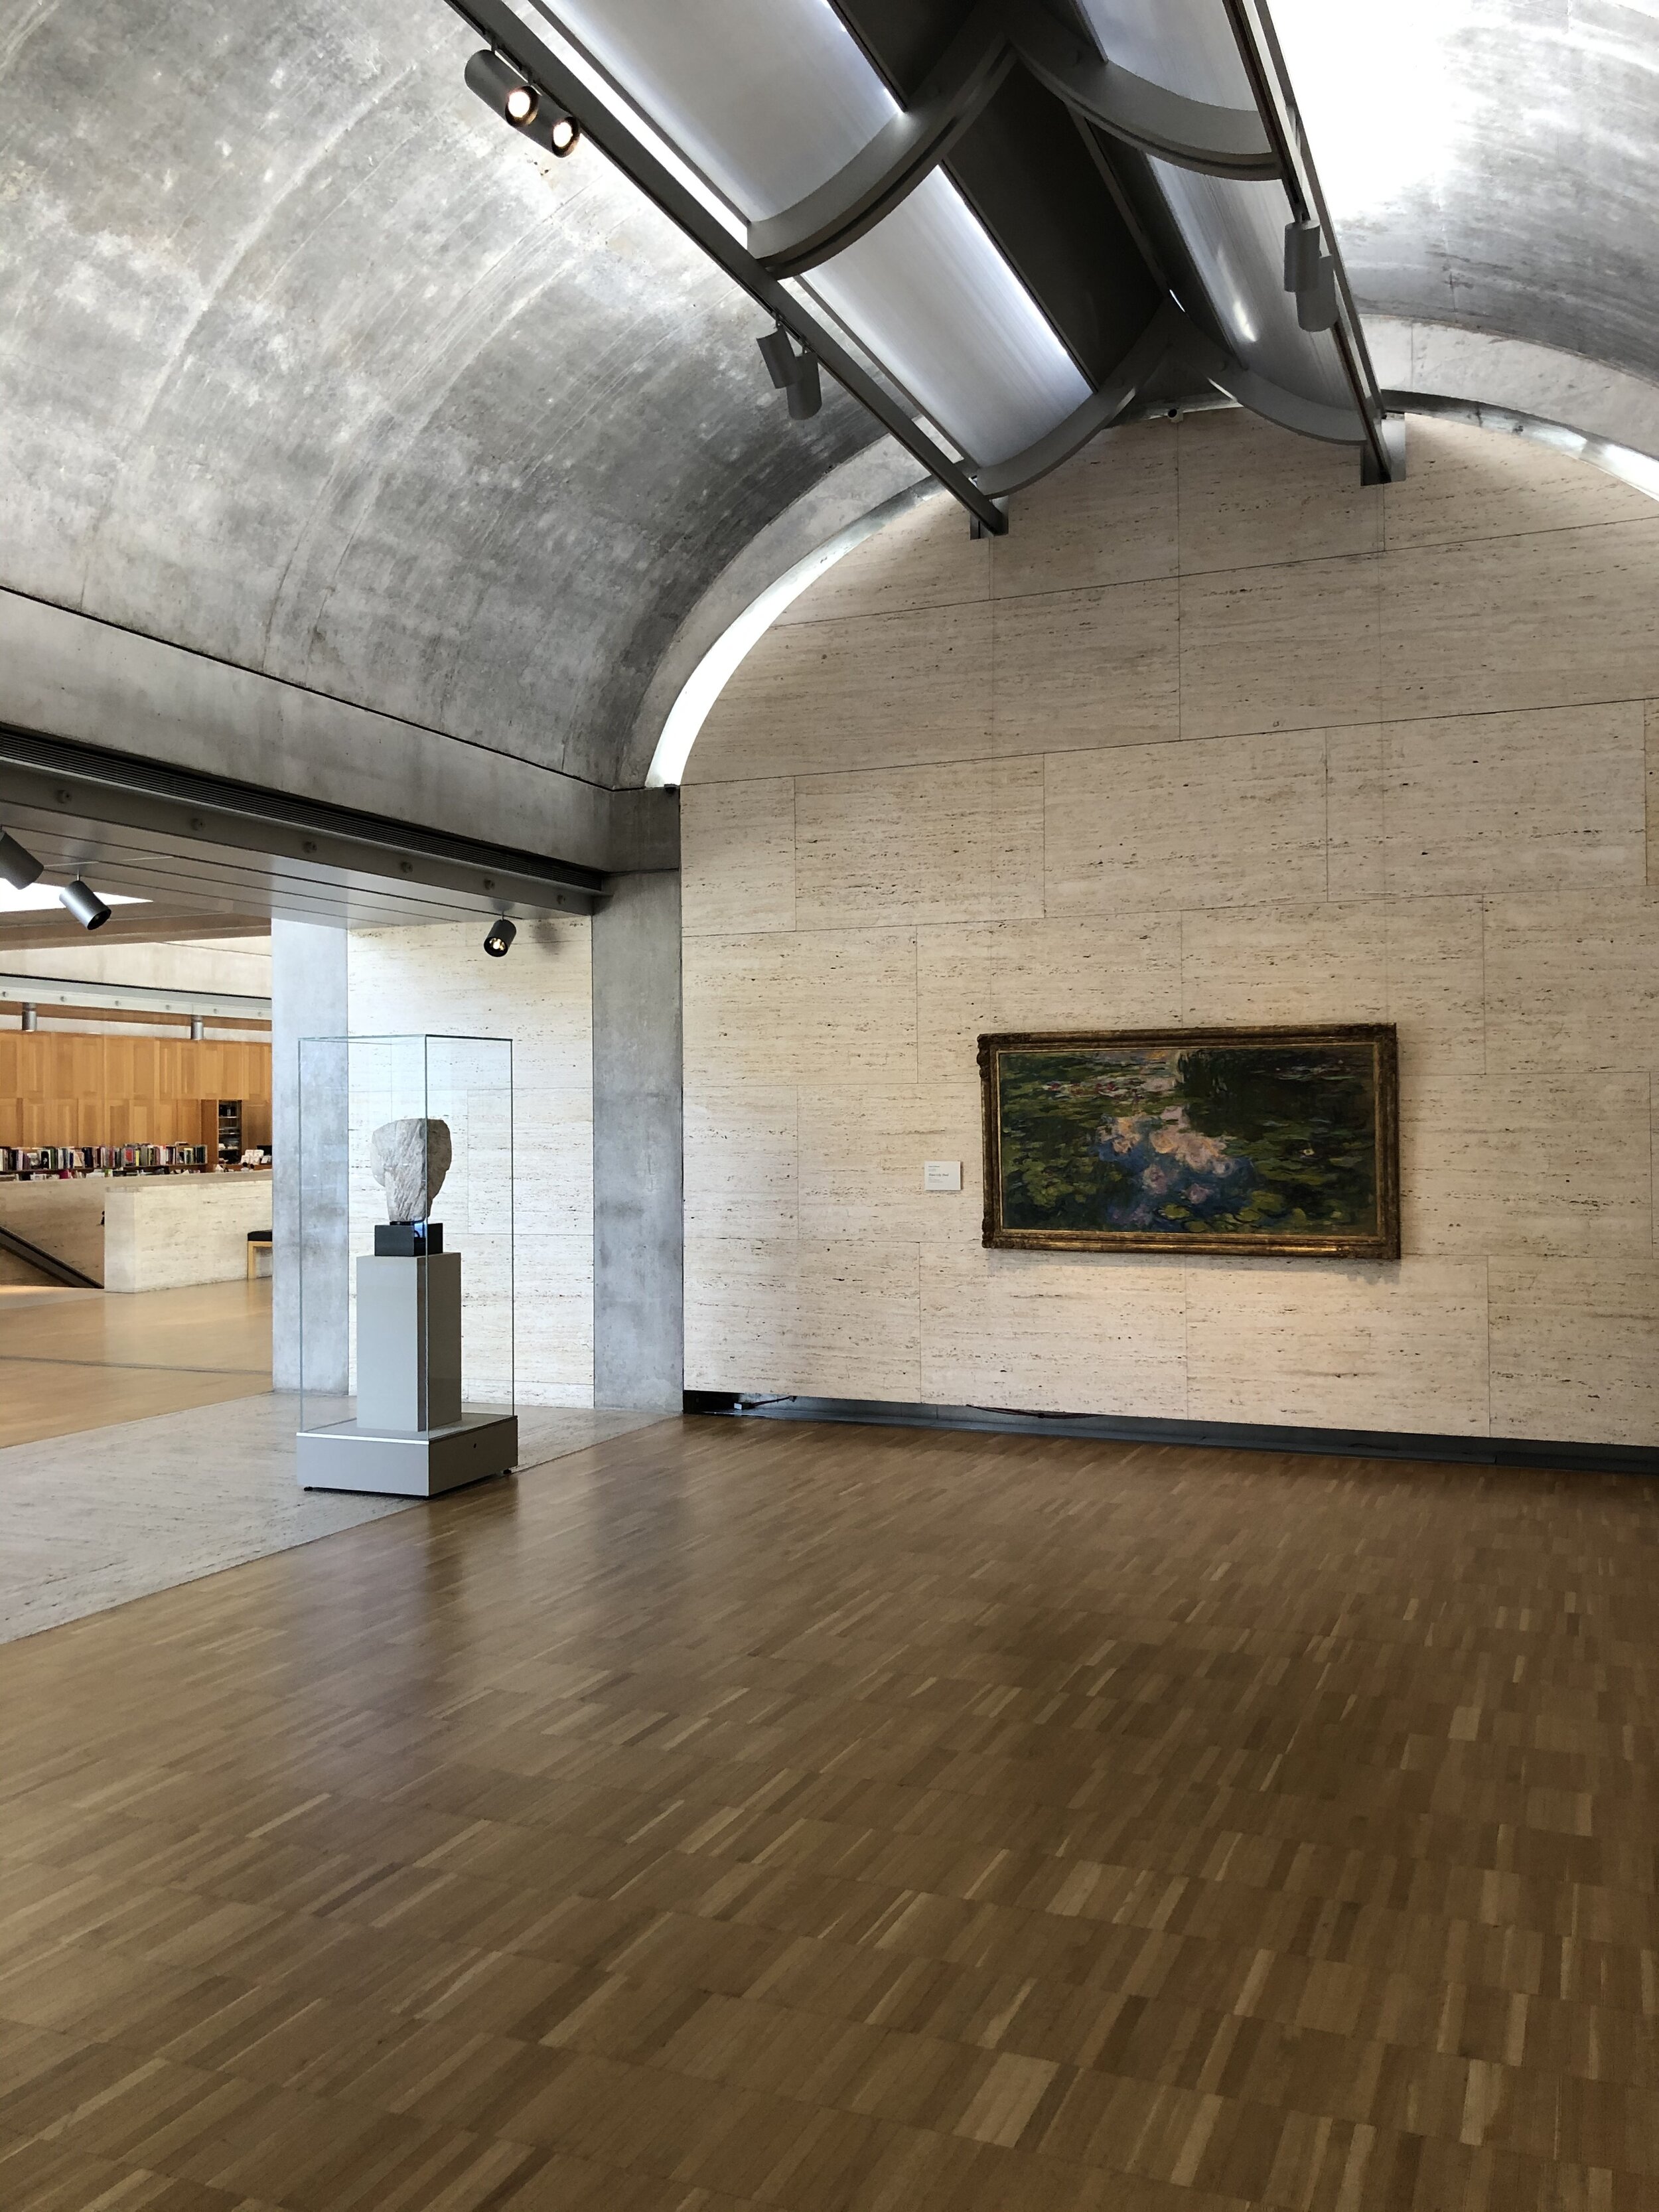 Vaults allow for an open floor plan with few partitions